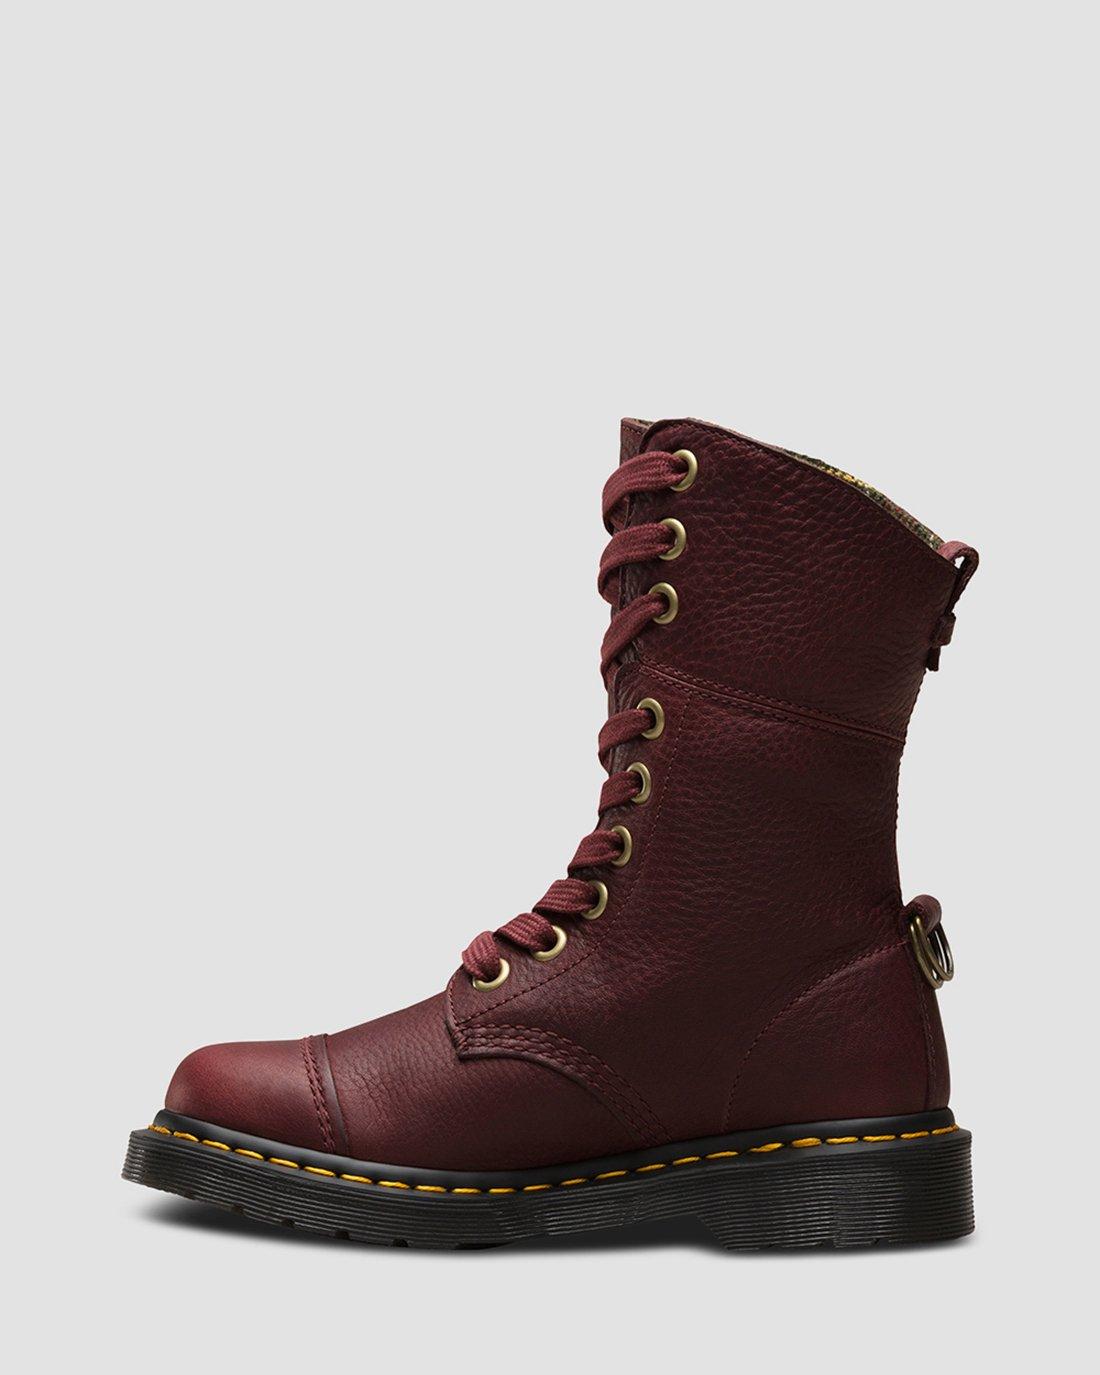 AIMILITA LEATHER HIGH BOOTS | Dr. Martens